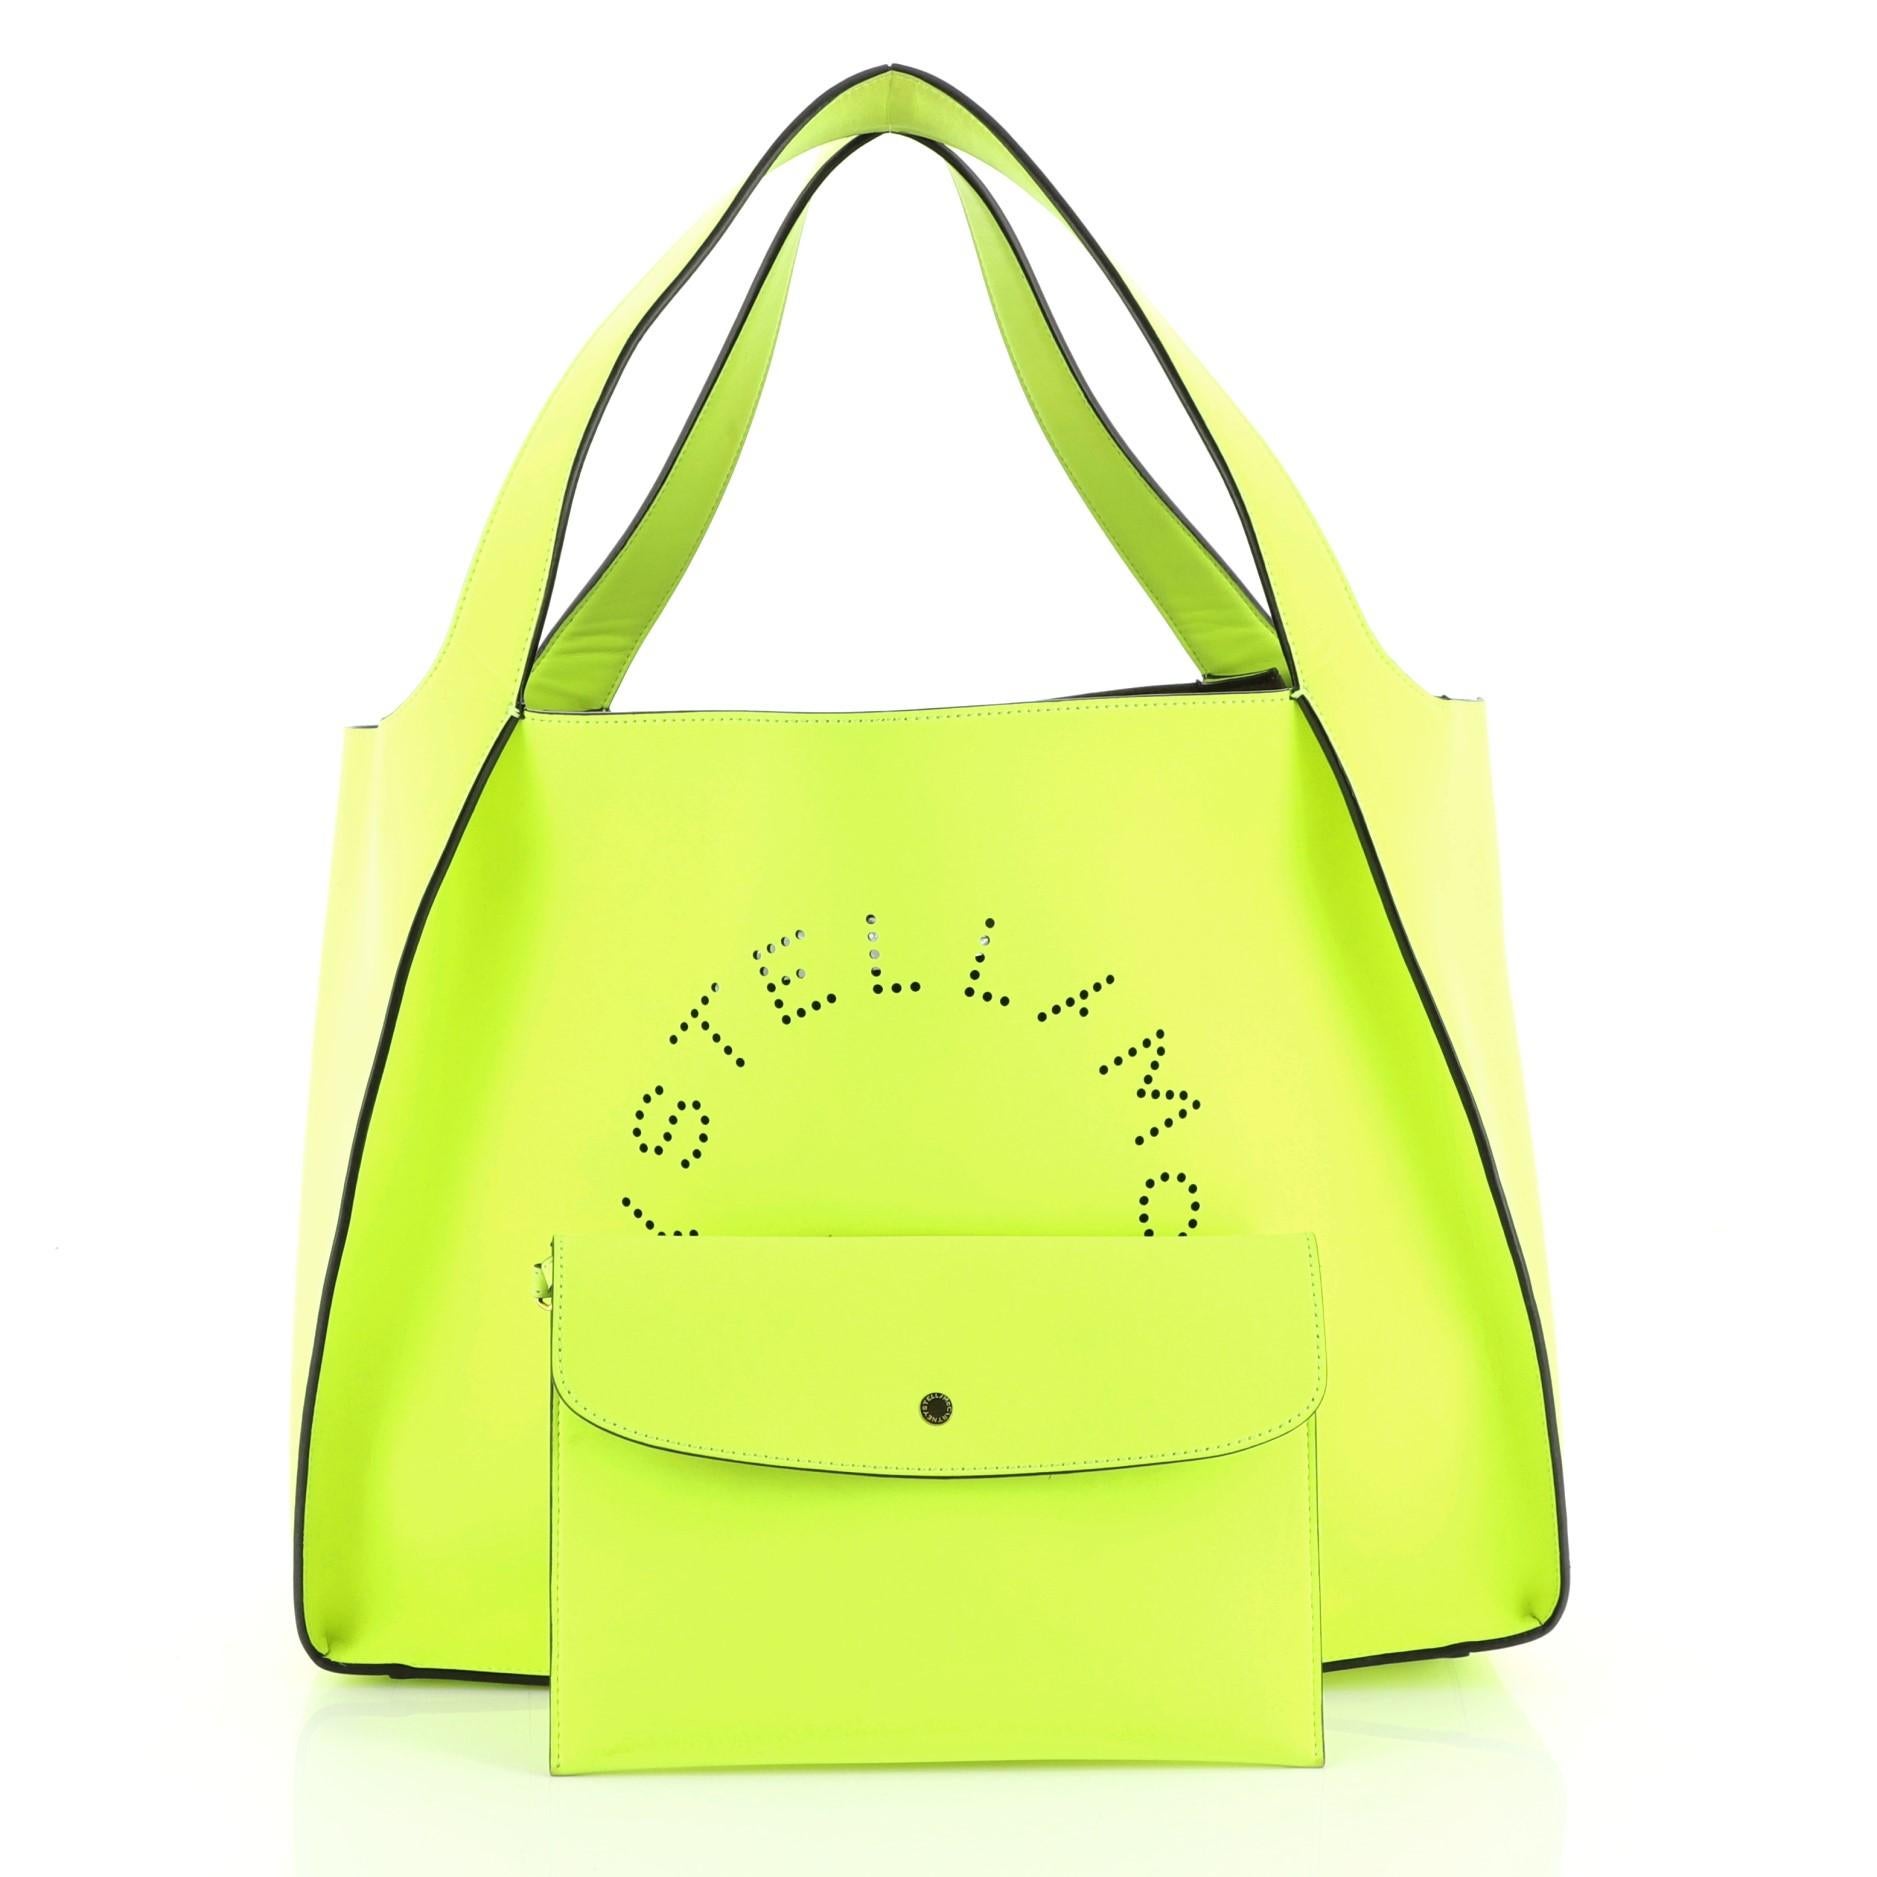 This Stella McCartney Alter Tote Perforated Faux Leather East West, crafted in green perforated faux leather, features dual flat handles, perforated logo at front, and gold-tone hardware. Its wide open top showcases a brown microfiber interior.